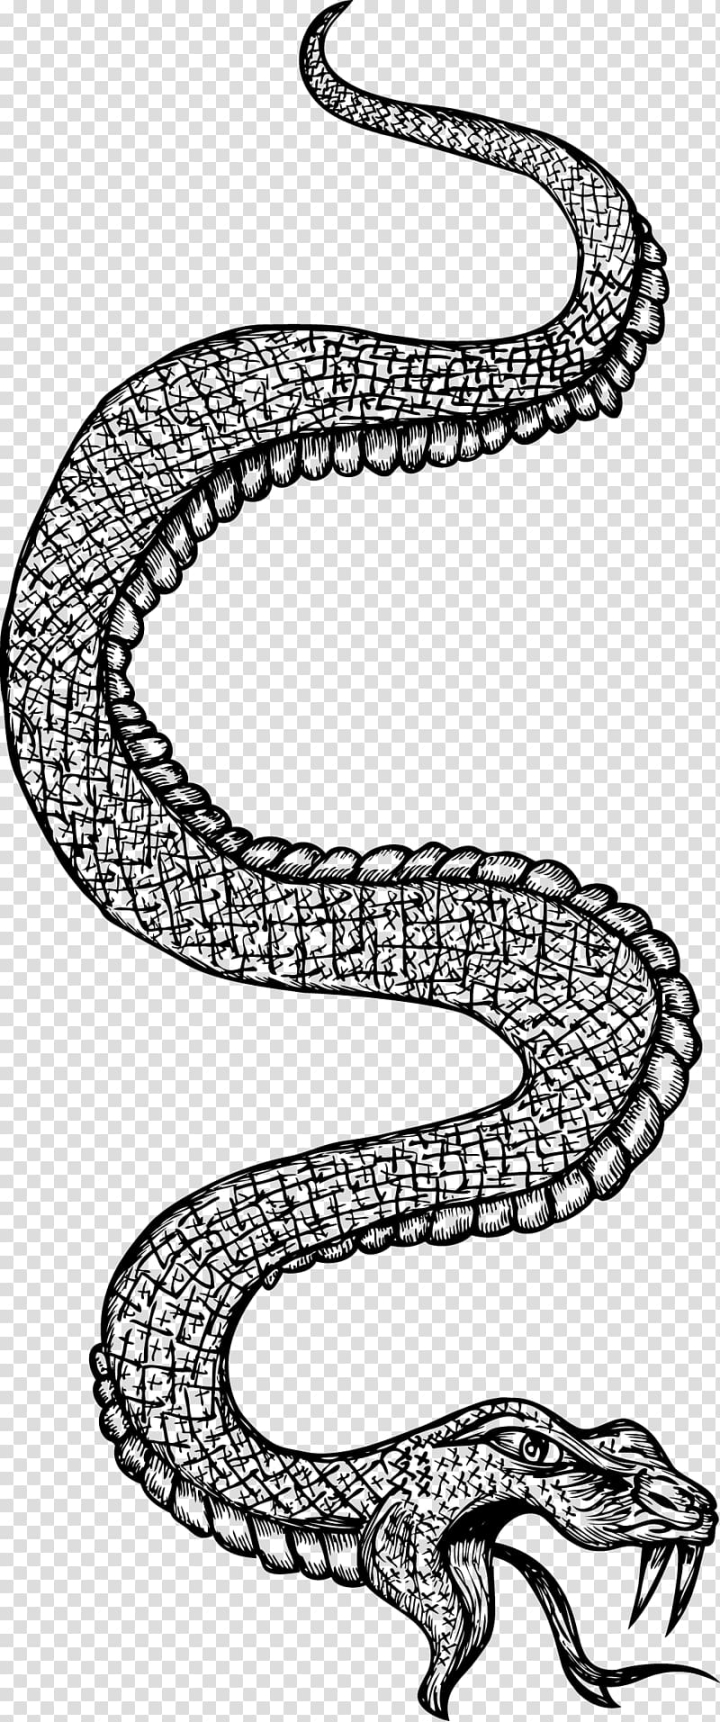 black,white,line,animals,vertebrate,monochrome,scaled reptile,vipers,shoe,tattoo,viper,kingsnake,serpent,reptile,body jewelry,organism,drawing,python family,snake,black and white,white line,line art,png clipart,free png,transparent background,free clipart,clip art,free download,png,comhiclipart